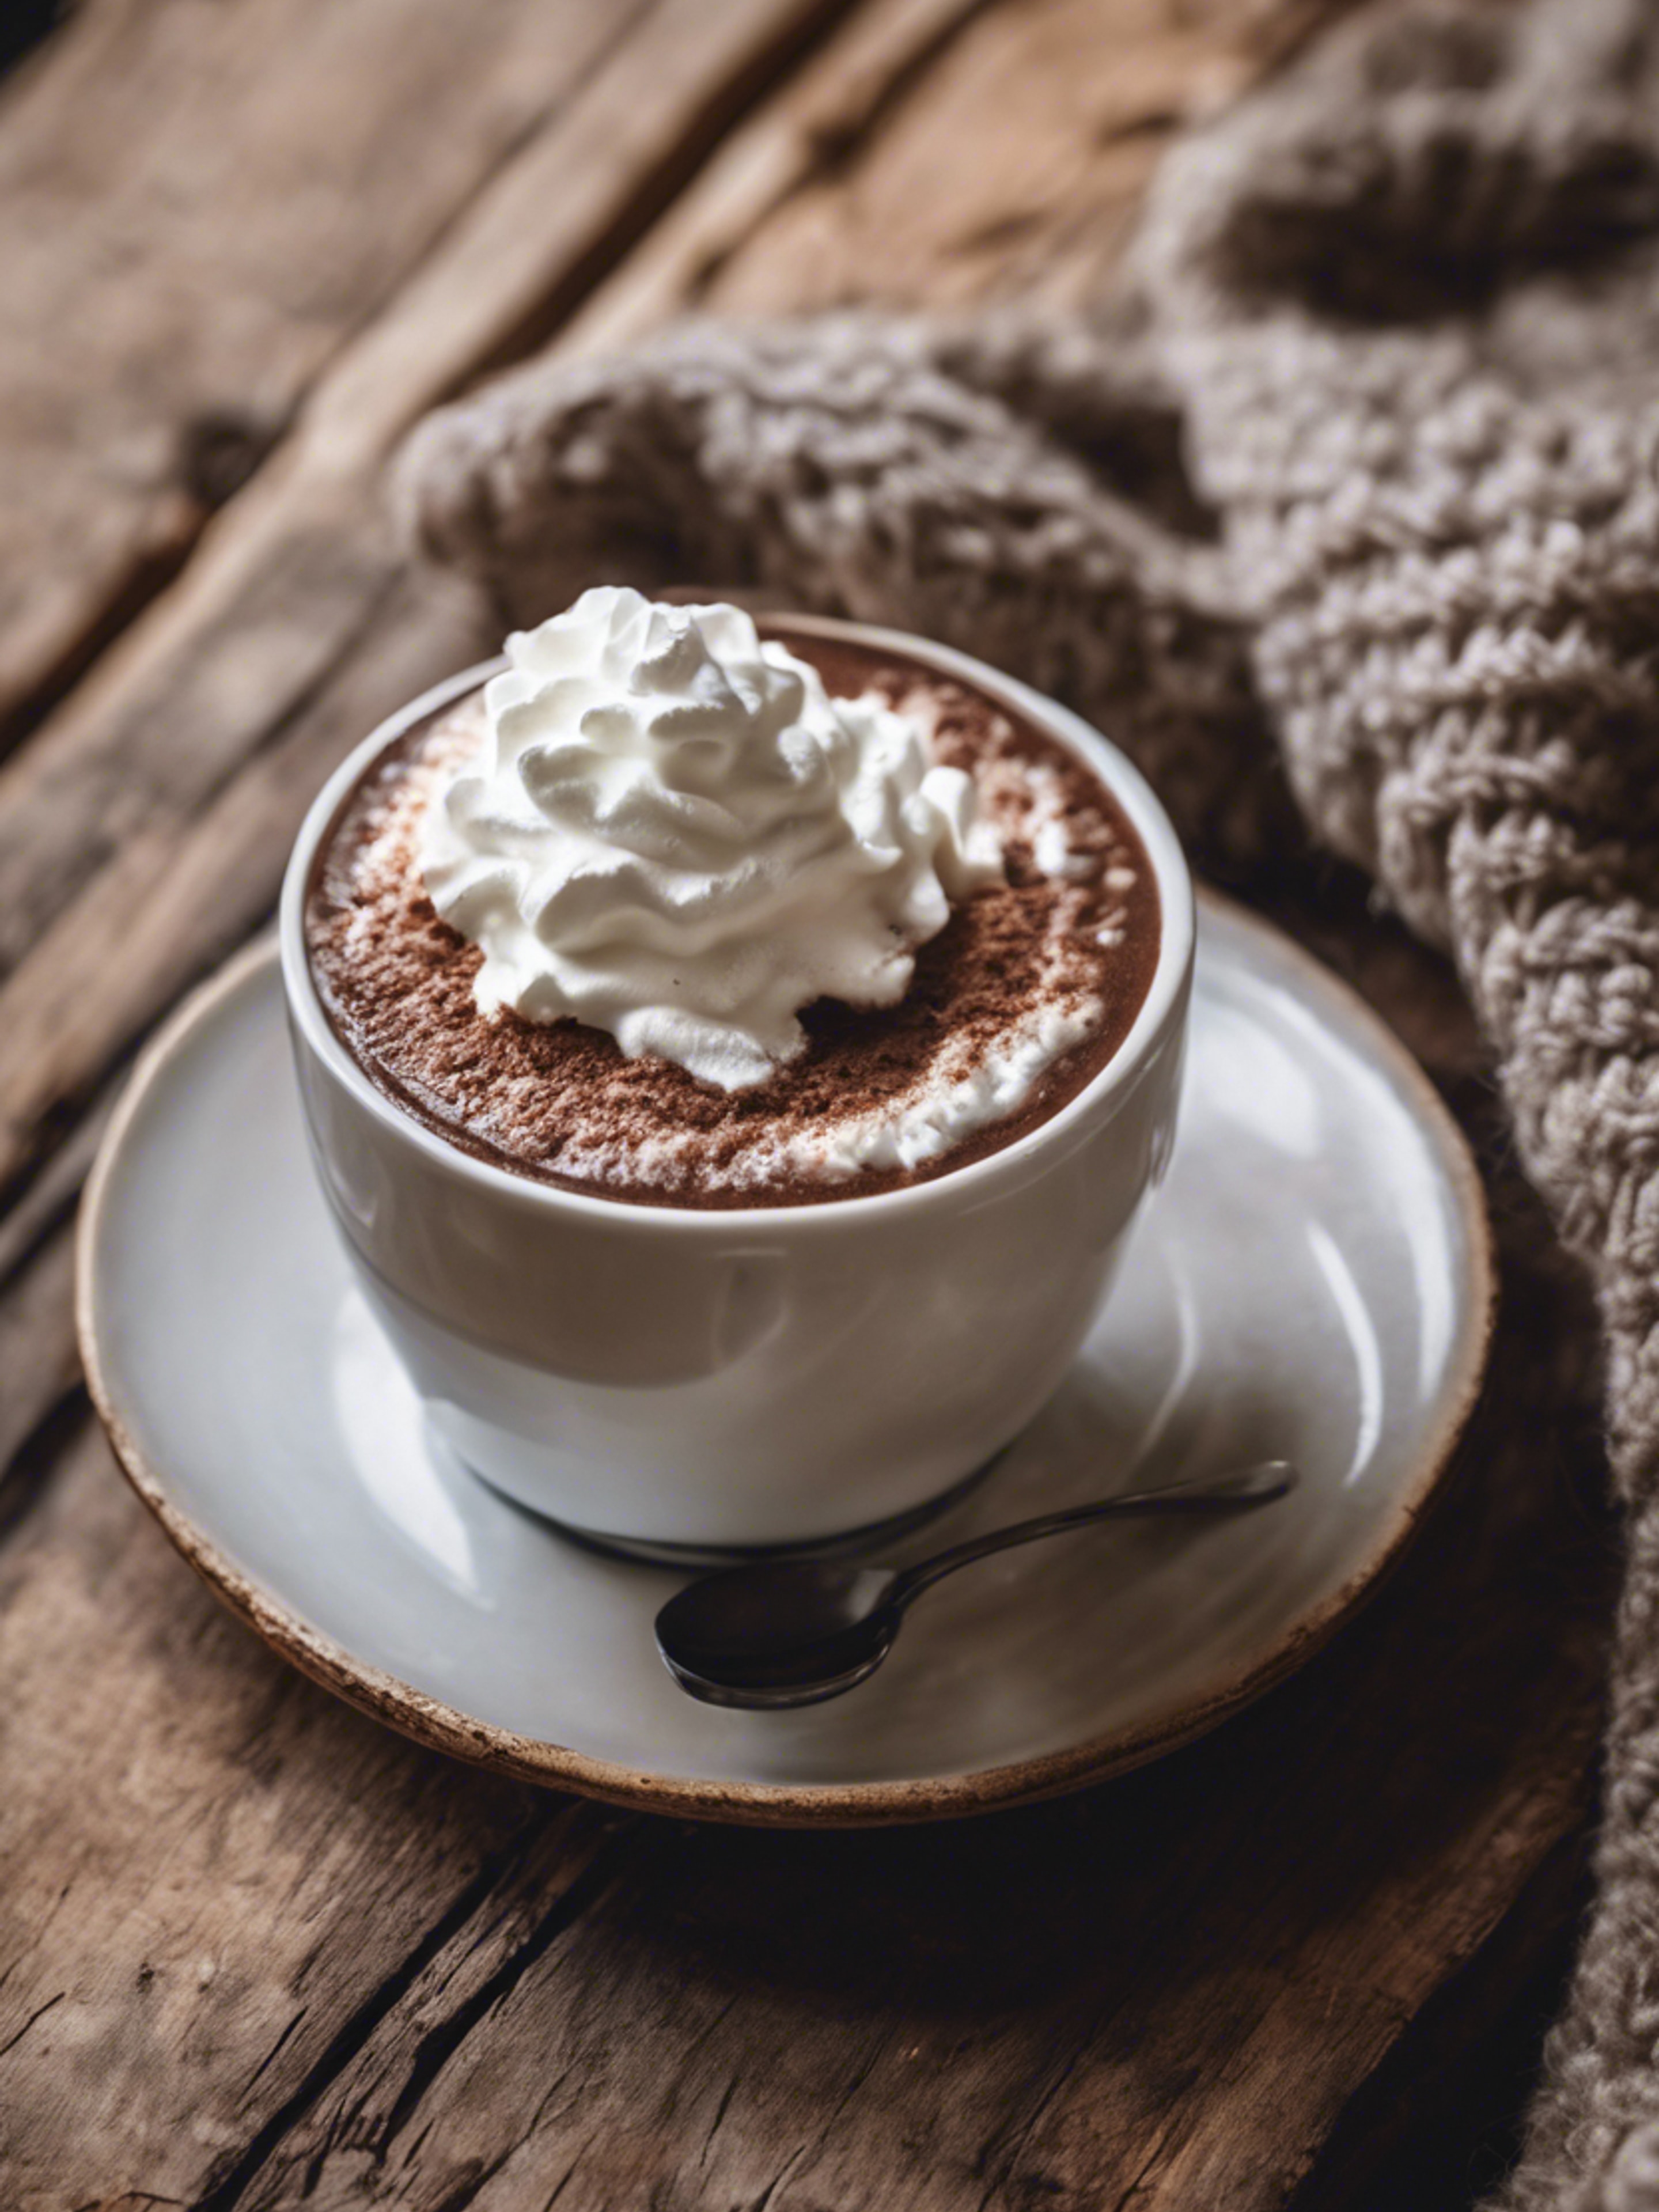 A porcelain cup of steaming hot chocolate topped with whipped cream, next to a crochet coaster on a rough wooden table. Papel de parede[f8ececc79cde48c88690]